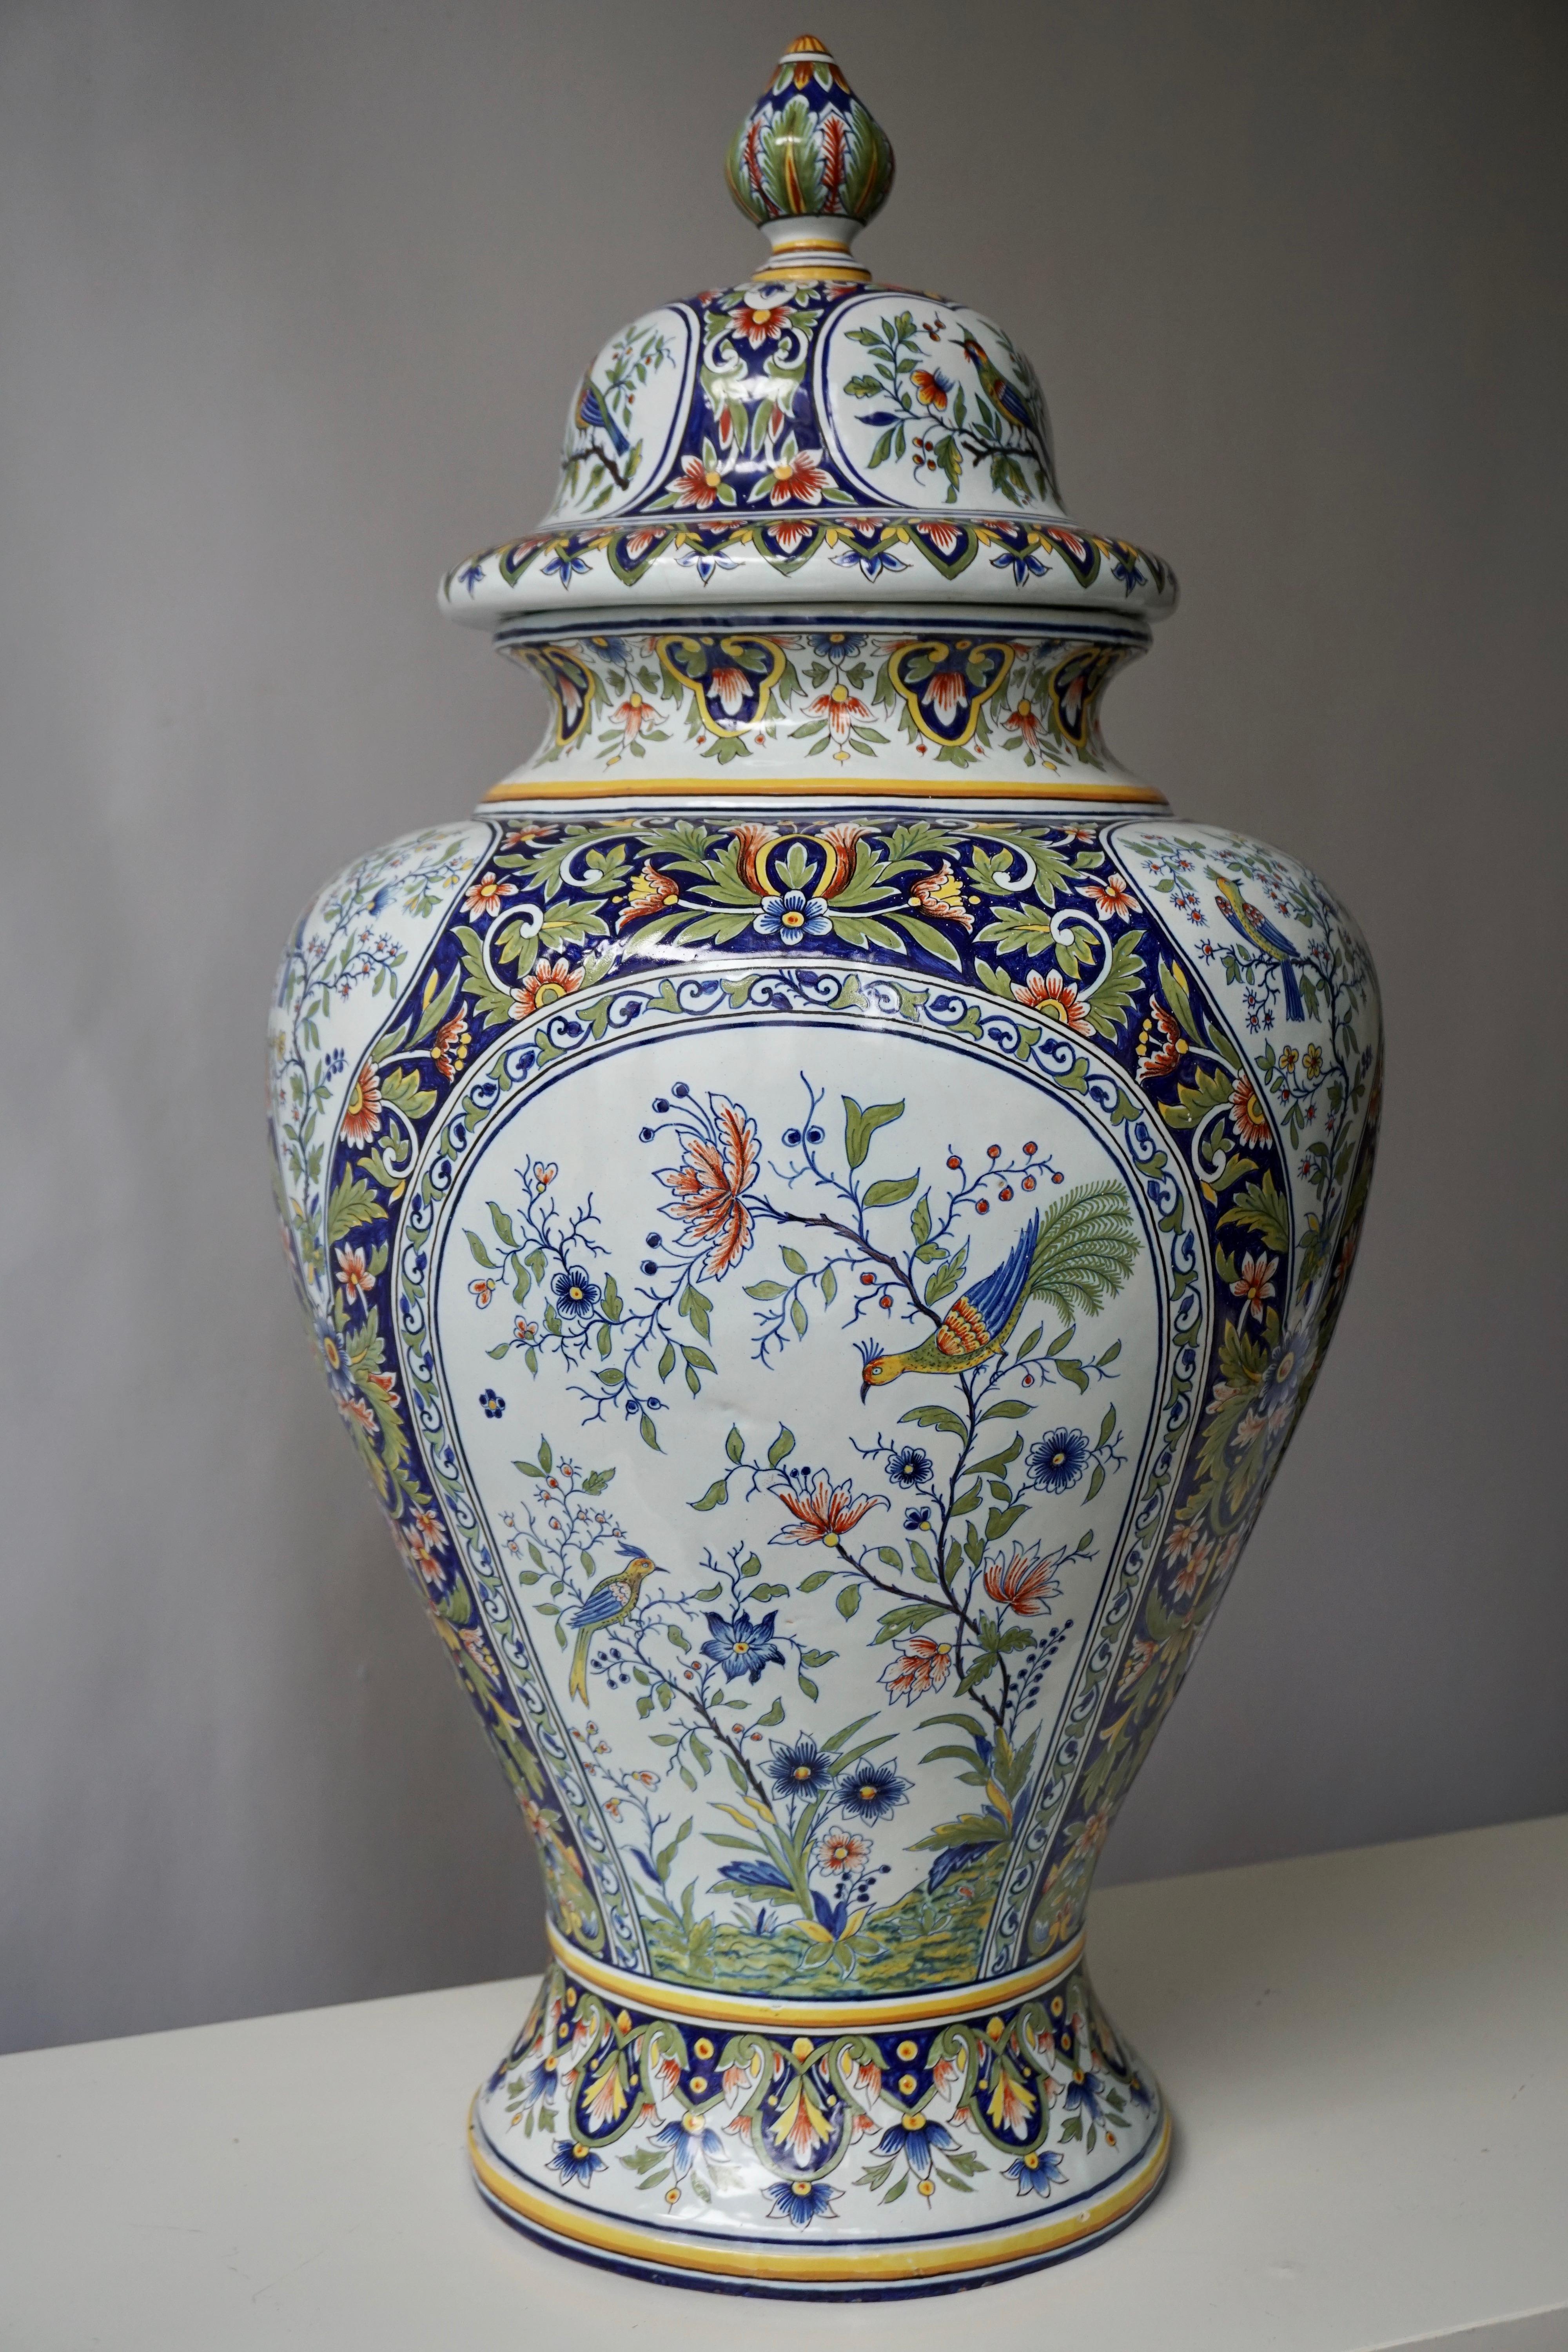 This elegant vase was crafted in Normandy, circa 1950. The ceramic, rounded potiche features hand painted flower decor with birds in a traditional blue, white, green and yellow palette. The lid of the porcelain vase is topped with three small bird